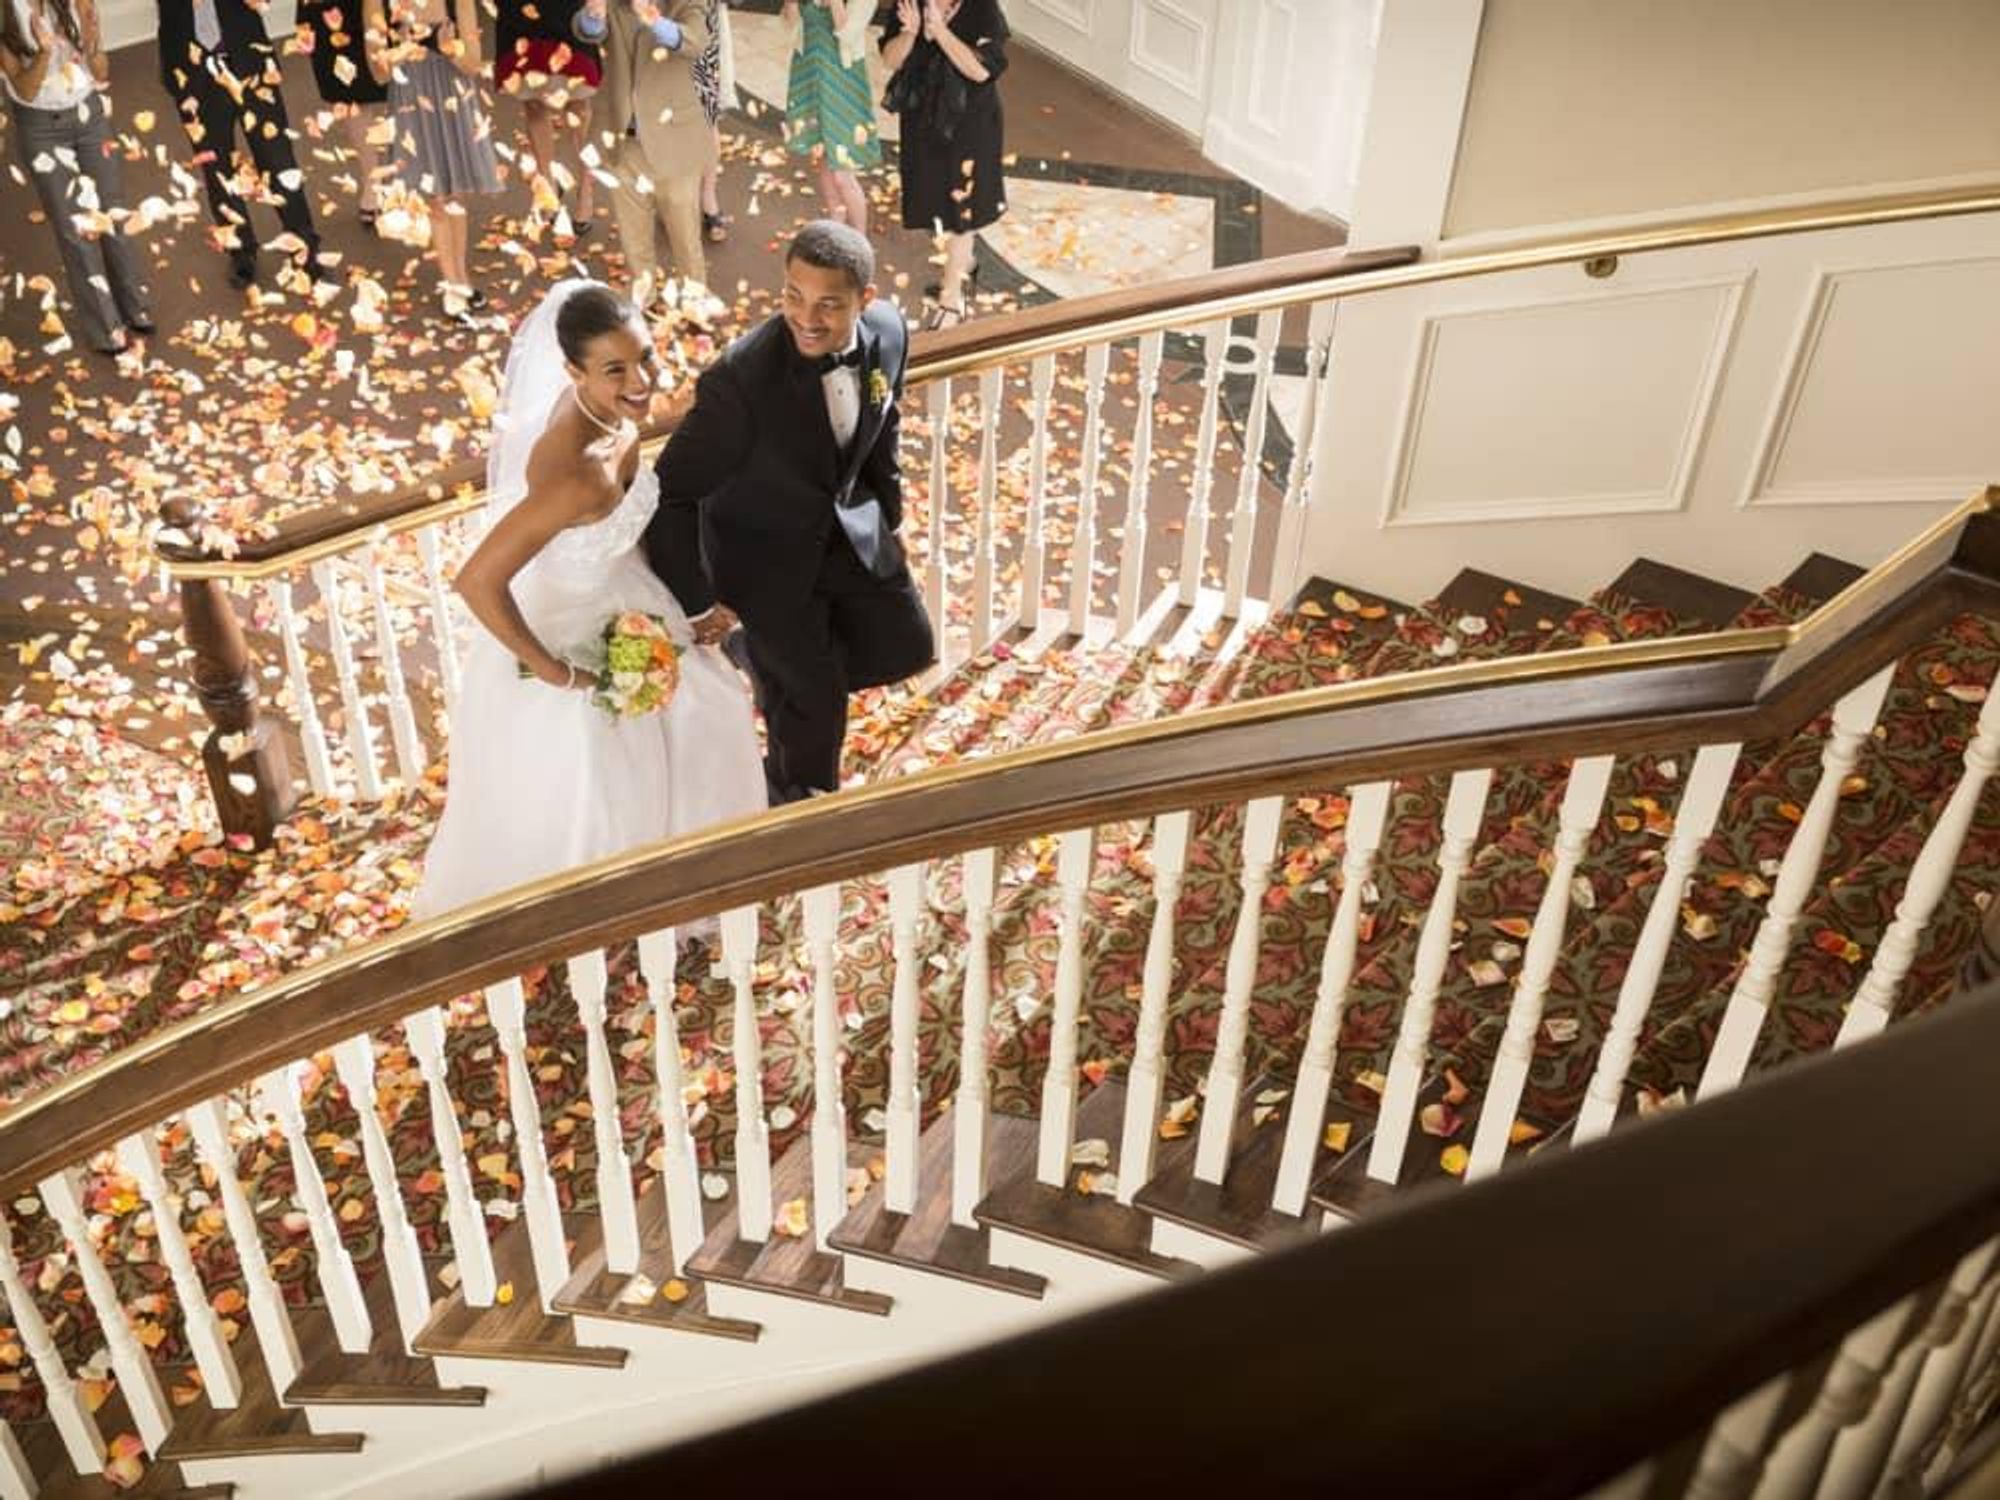 Grand Staircase at Tremont House wedding